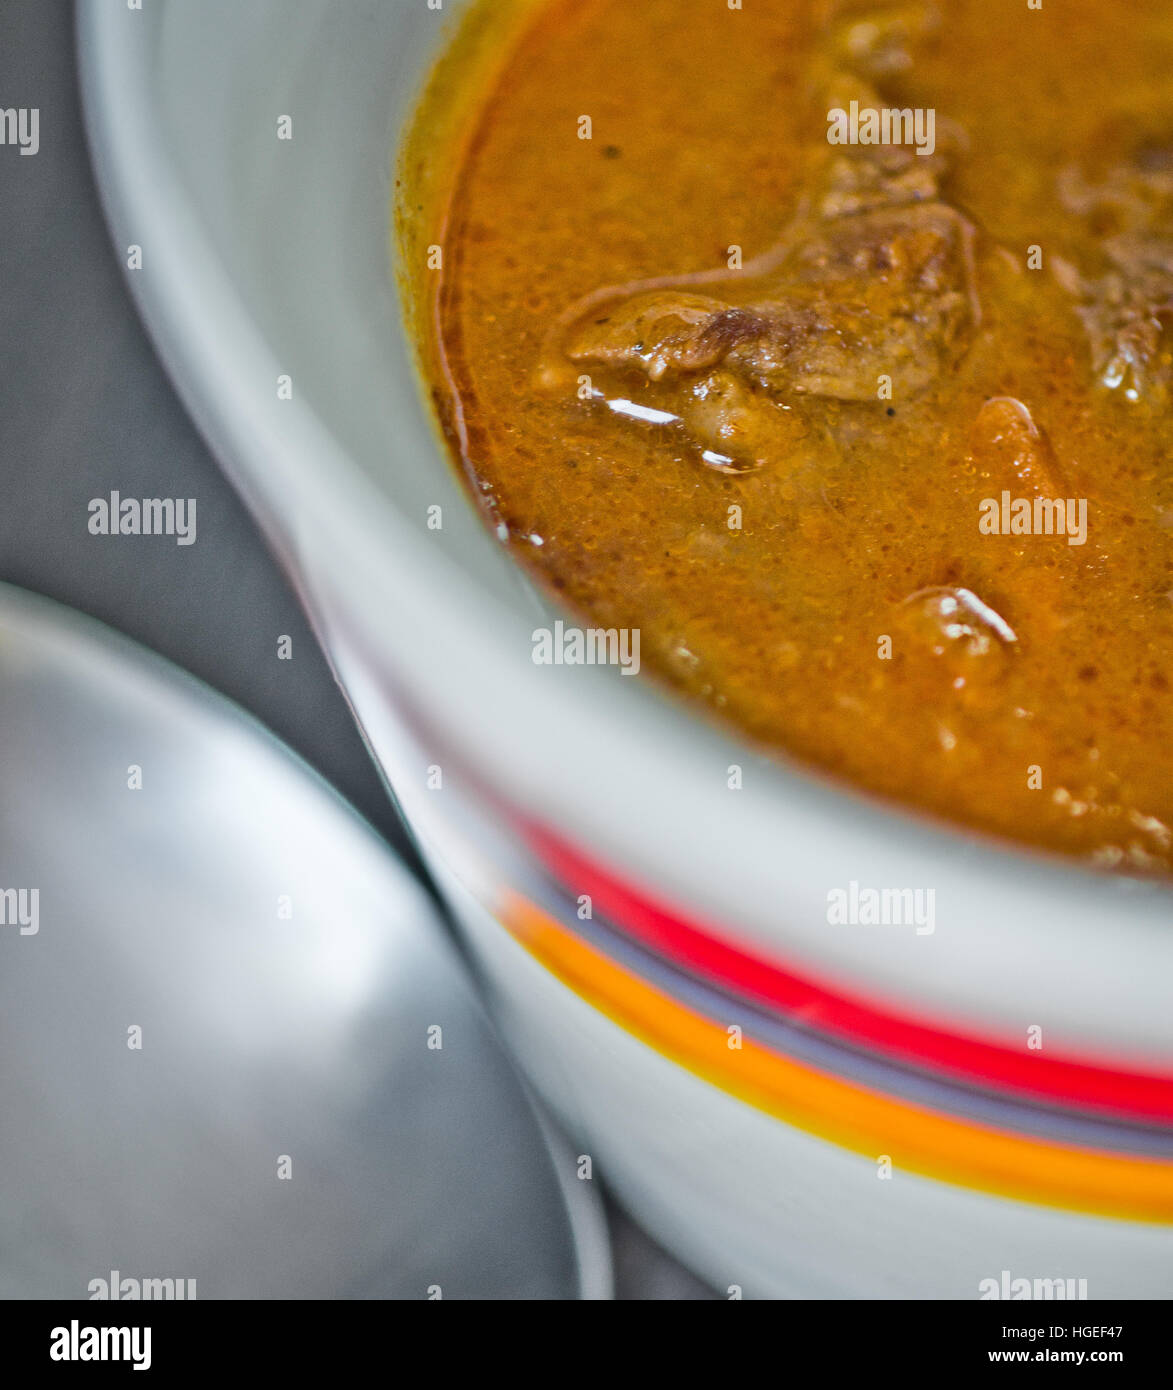 cup of tasty soup, hot and steaming with beef, vegetables, curry, turmeric and clove seeds Stock Photo